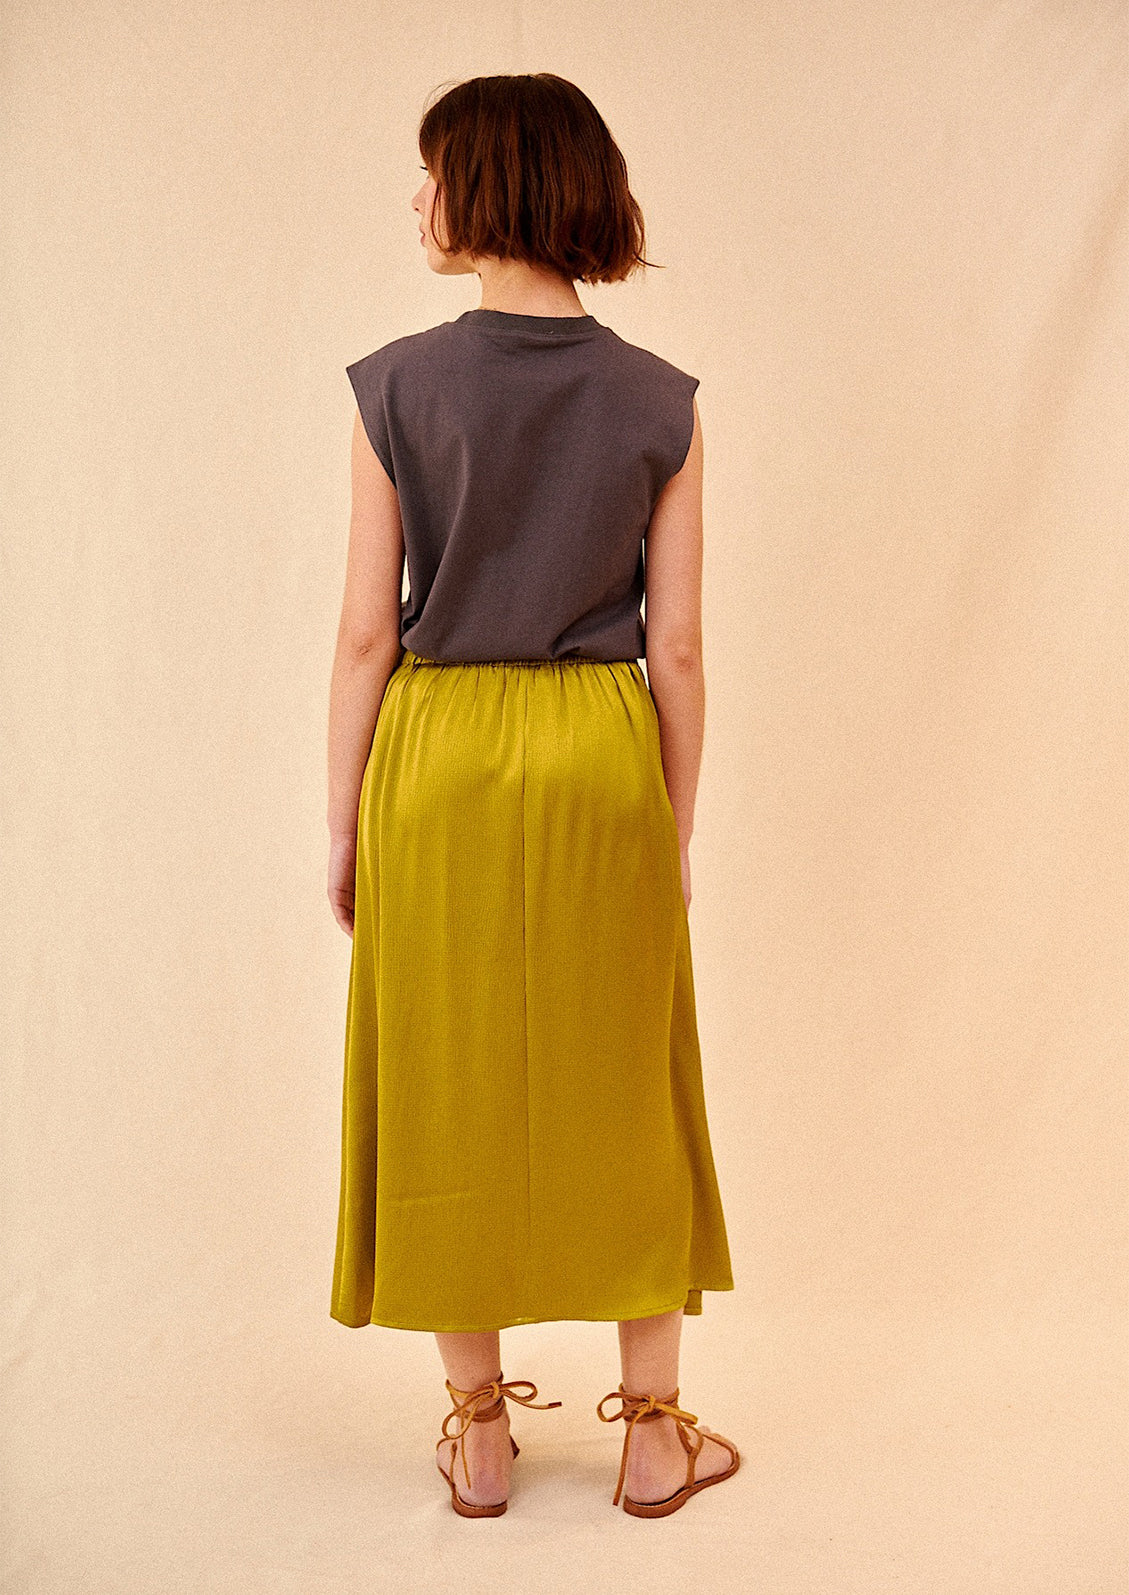 Woman wearing olive green midi skirt, t-shirt, and sandals, seen from behind. 